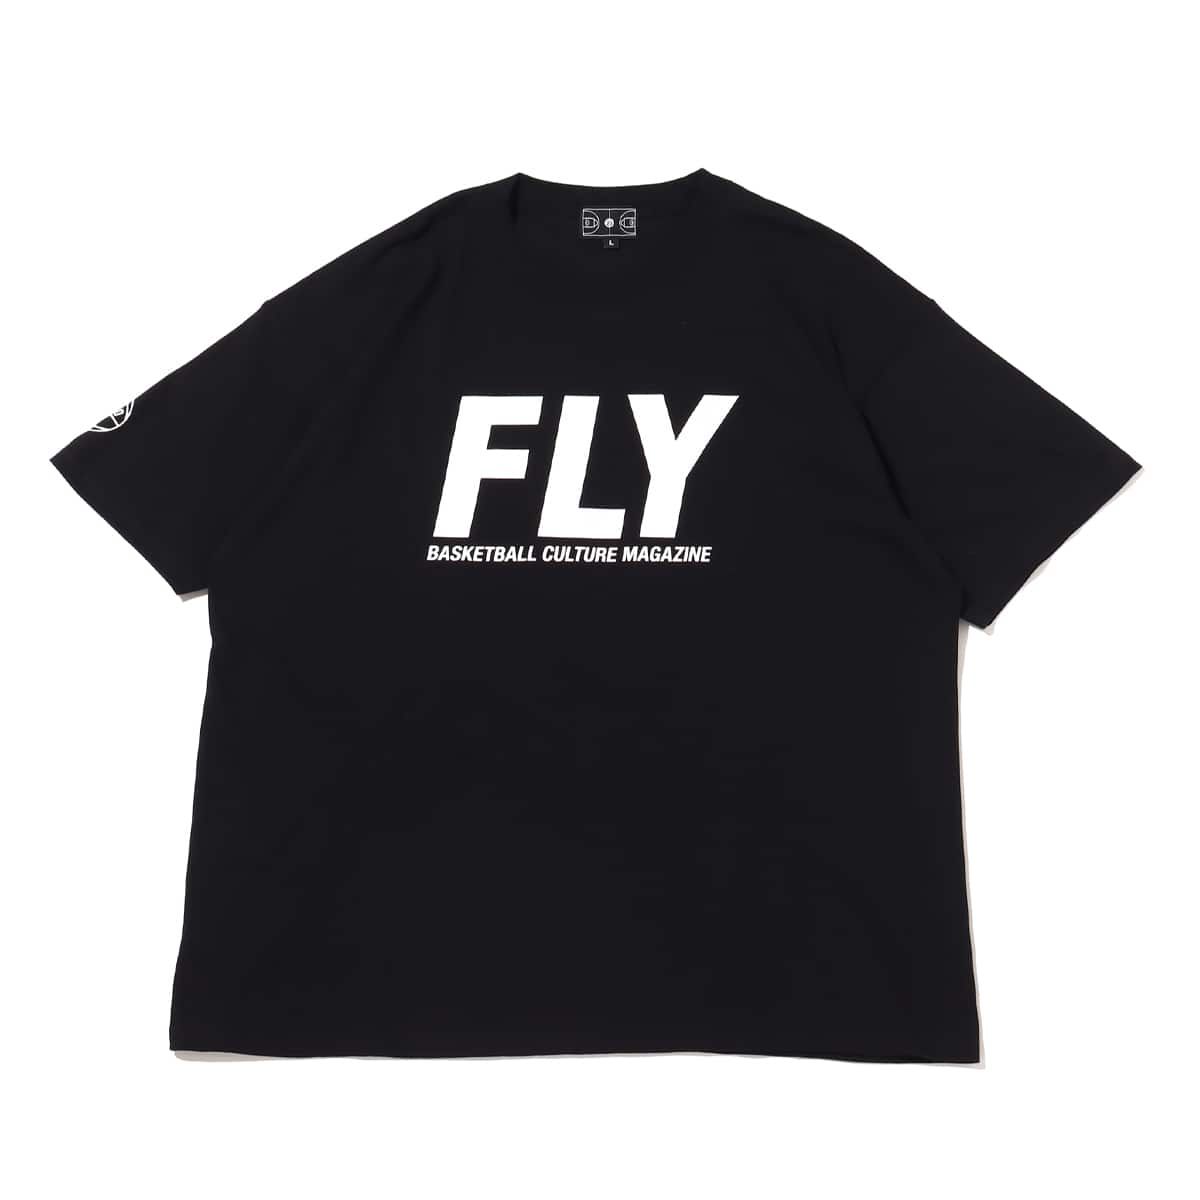 TOKYO 23 x FLY BASKETBALL CULTURE MAGAZINE TEE BLACK 22FW-S_photo_large